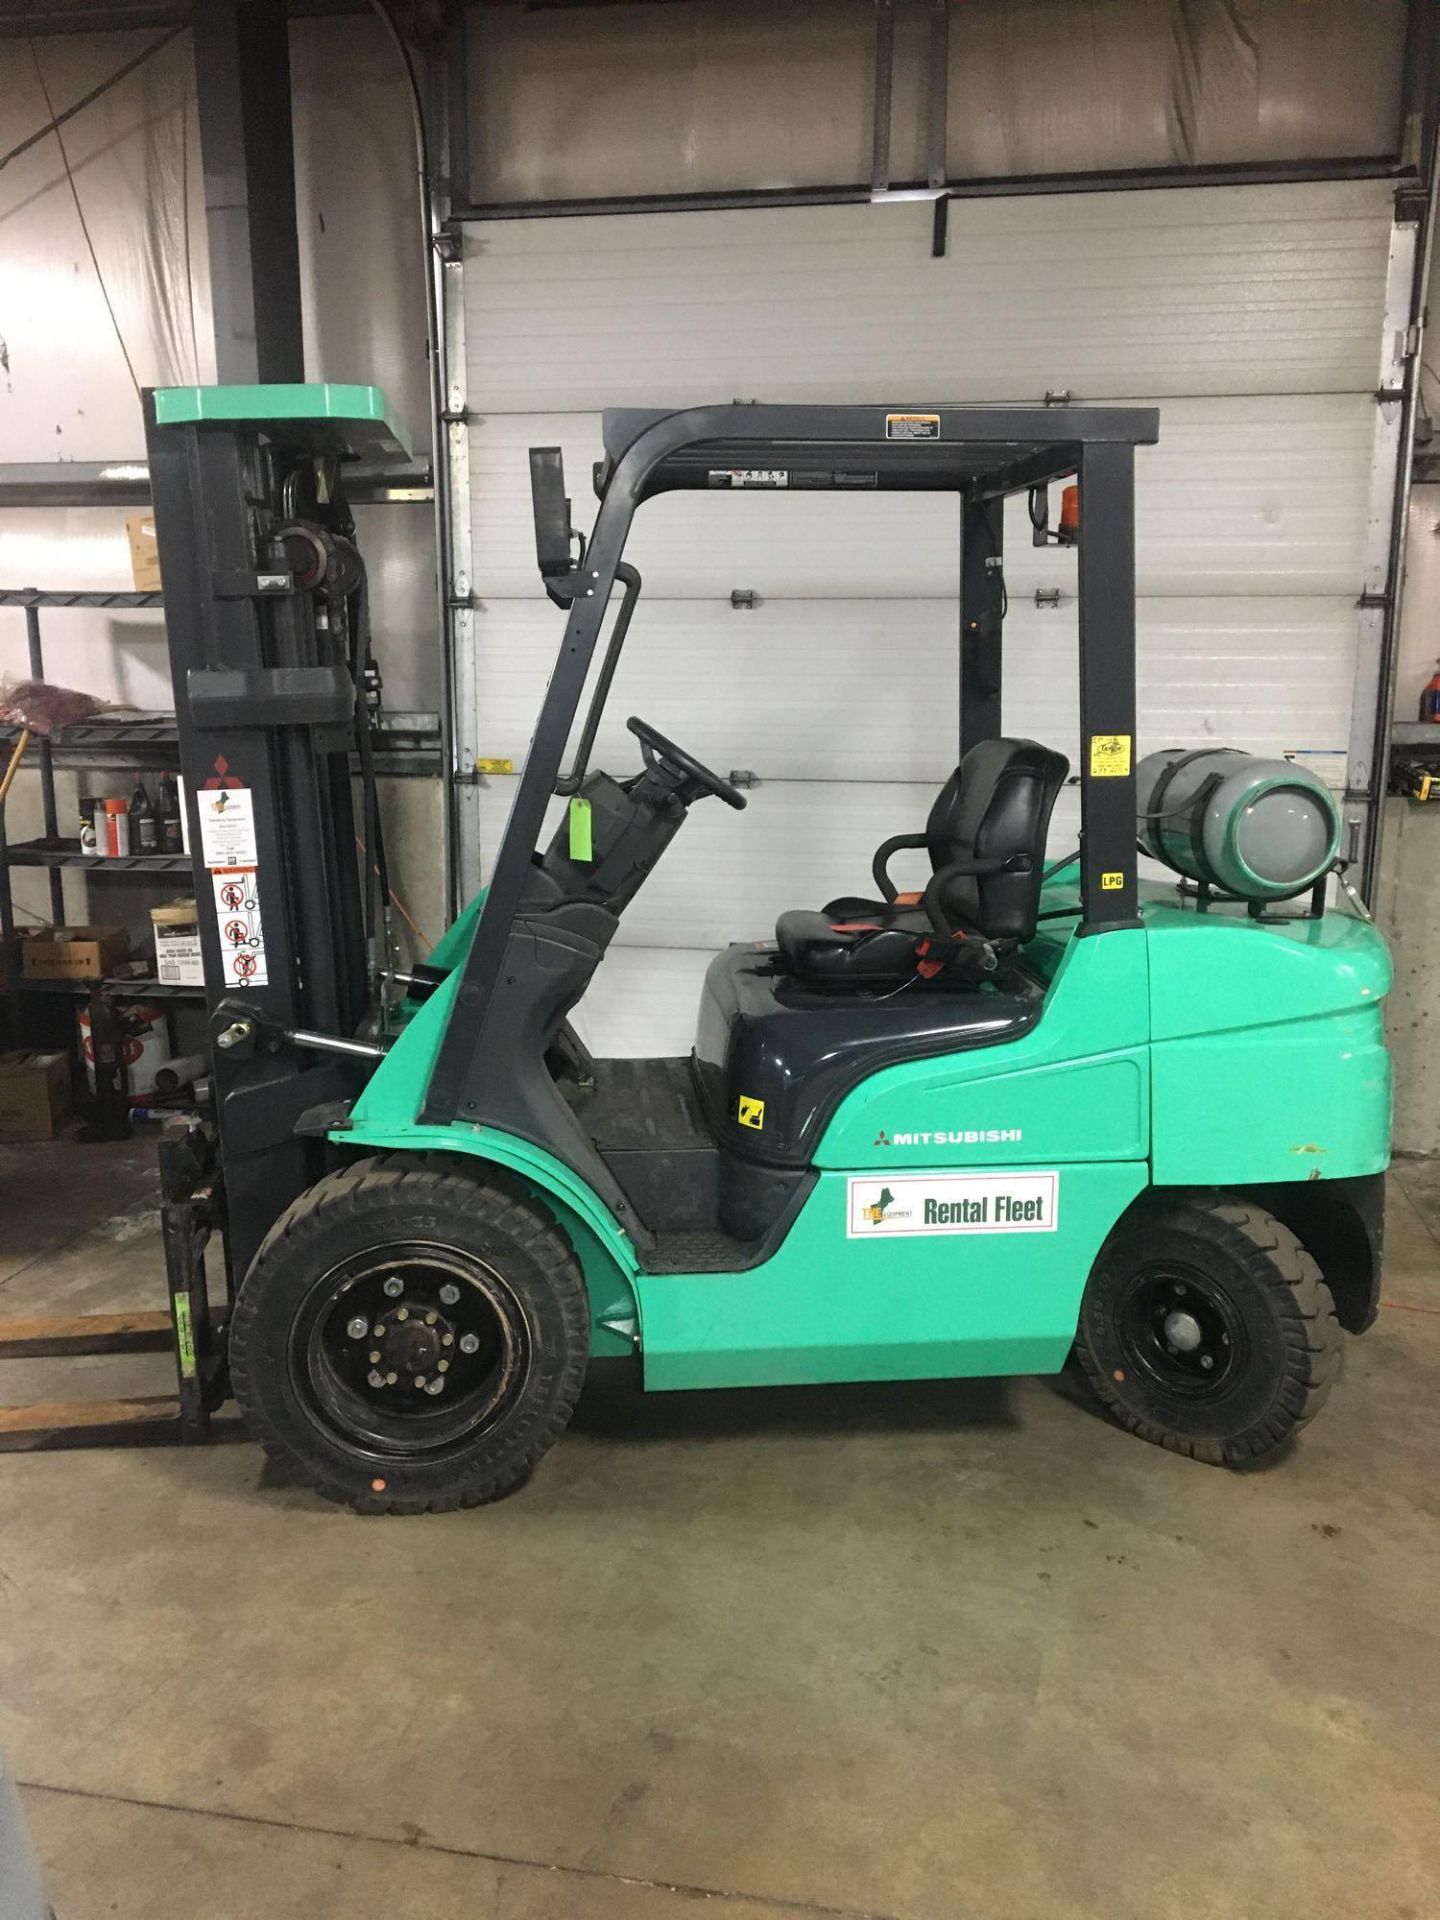 Propane Forklift, Mitsubishi, FG30N, Max Ht 186", Max Cap 5500lbs, 205 HRS Started and Moved